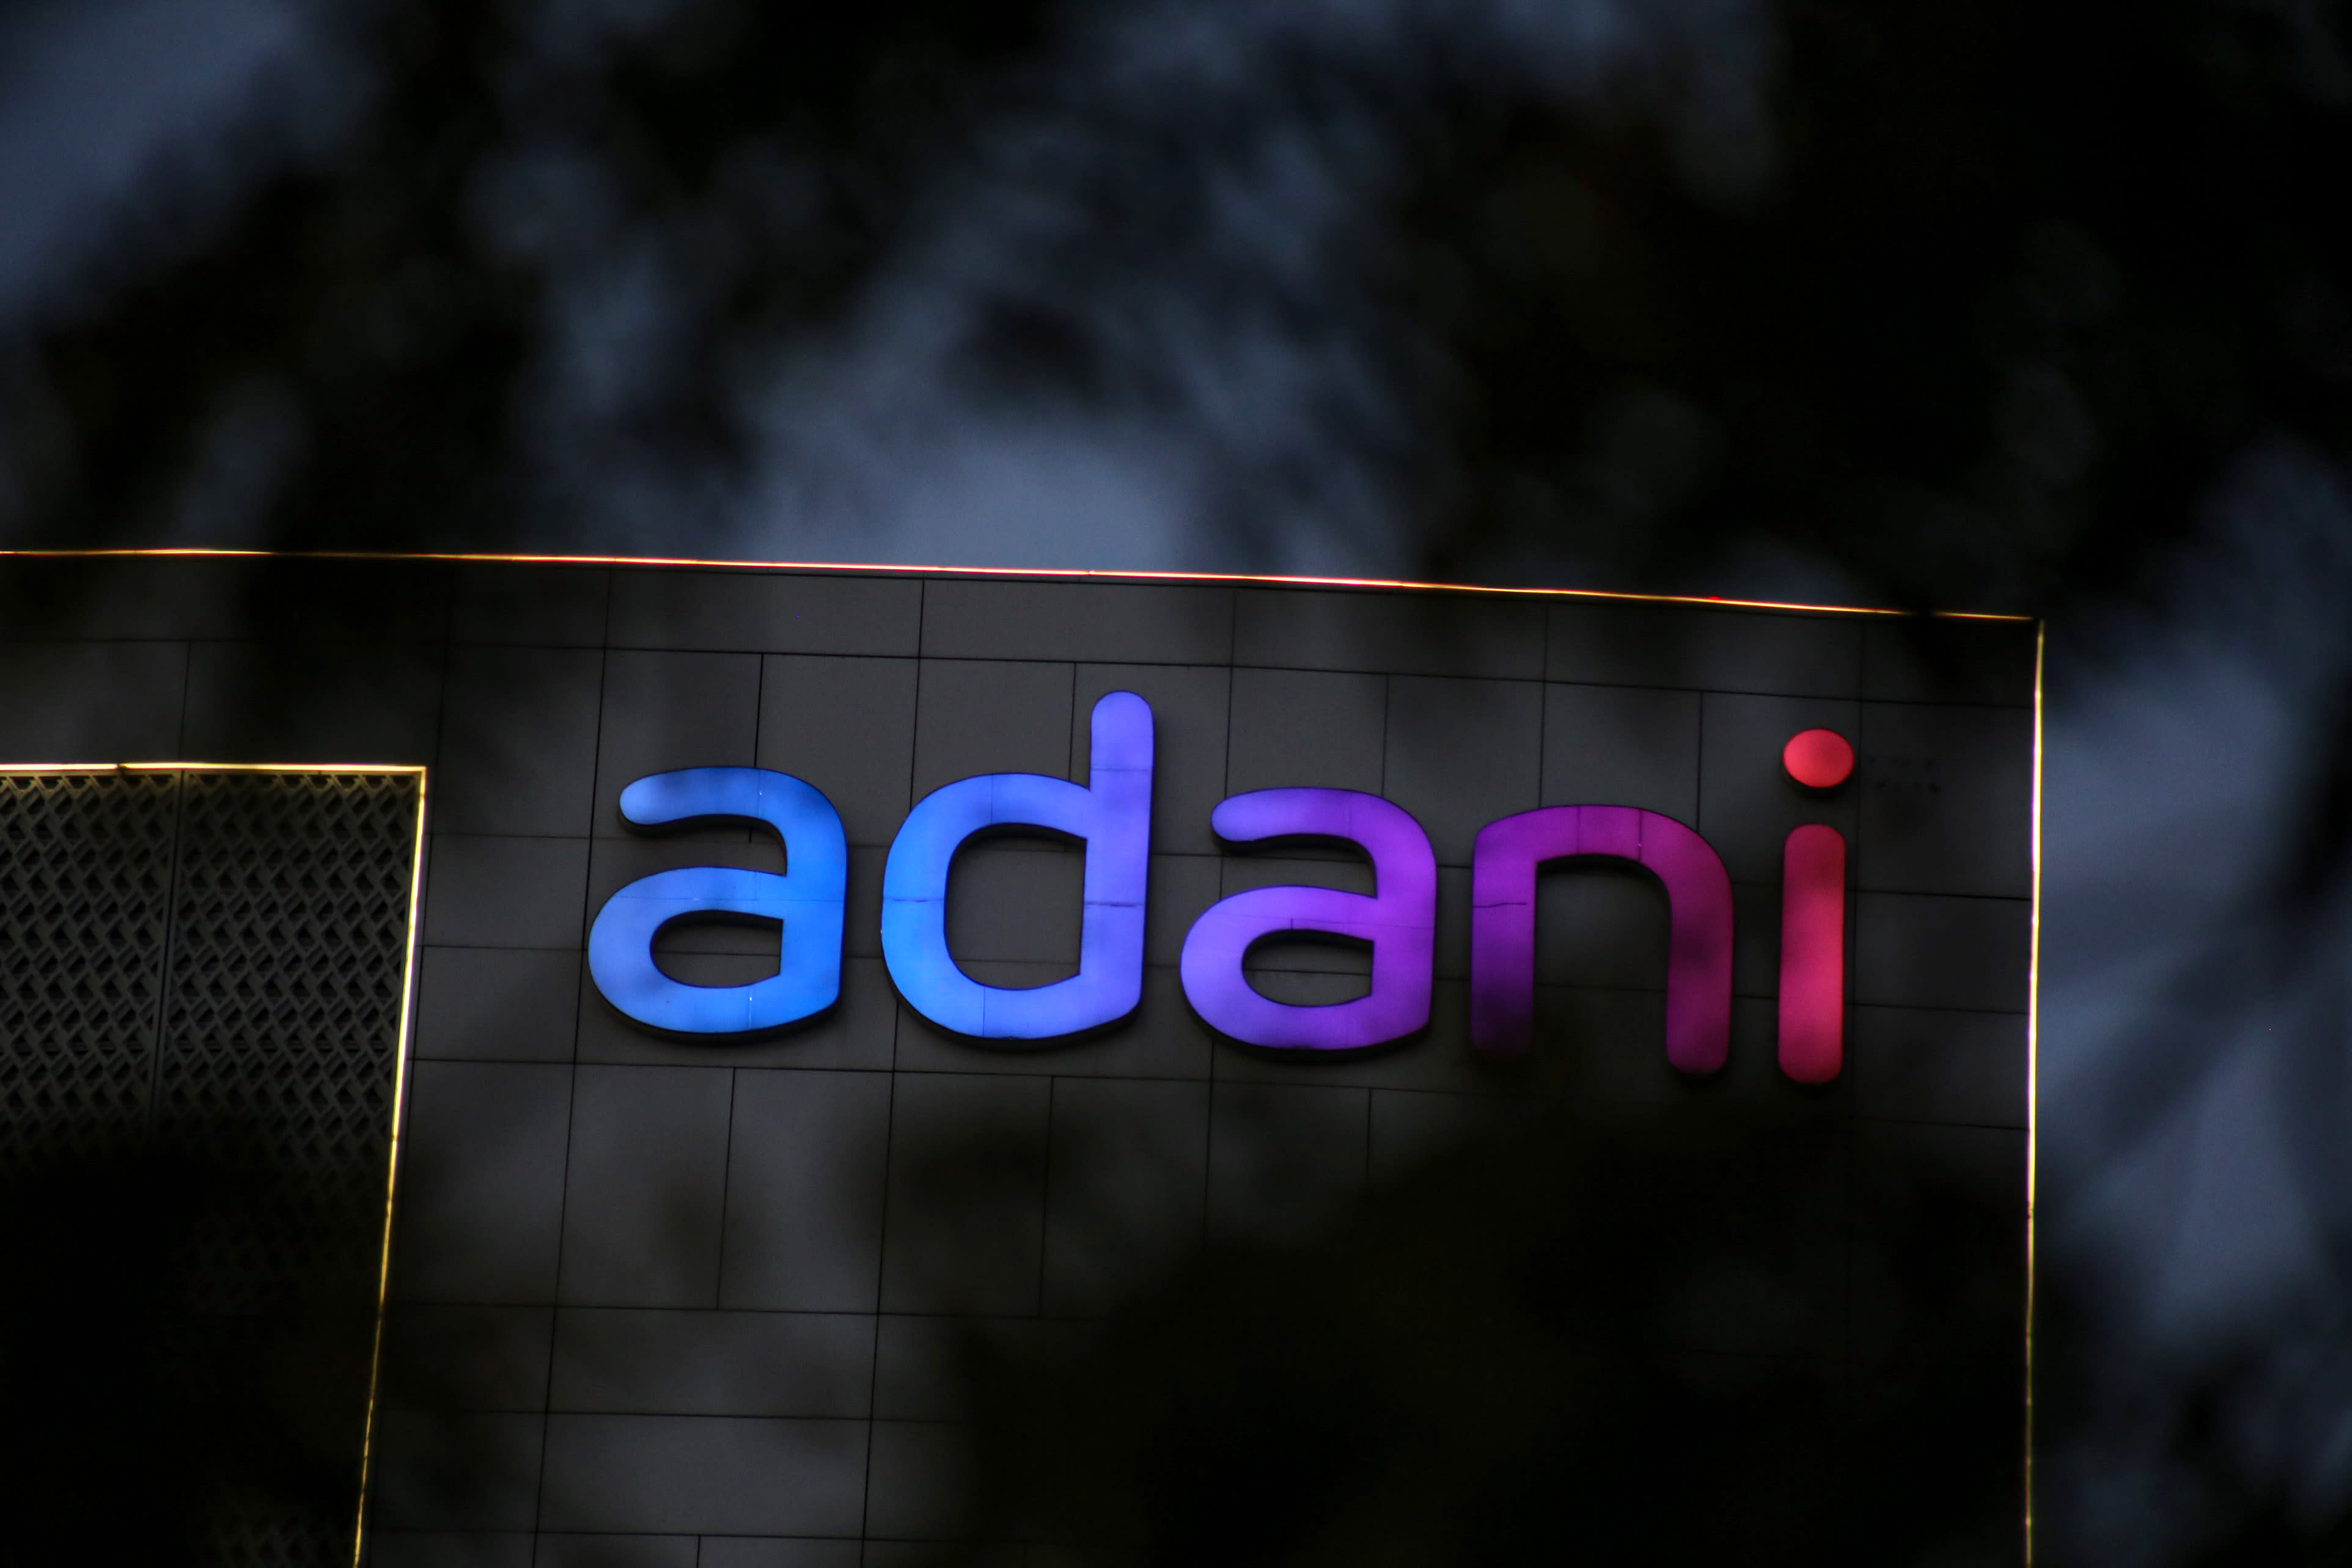 These ETFs and mutual funds face millions in losses amid the Adani crisis